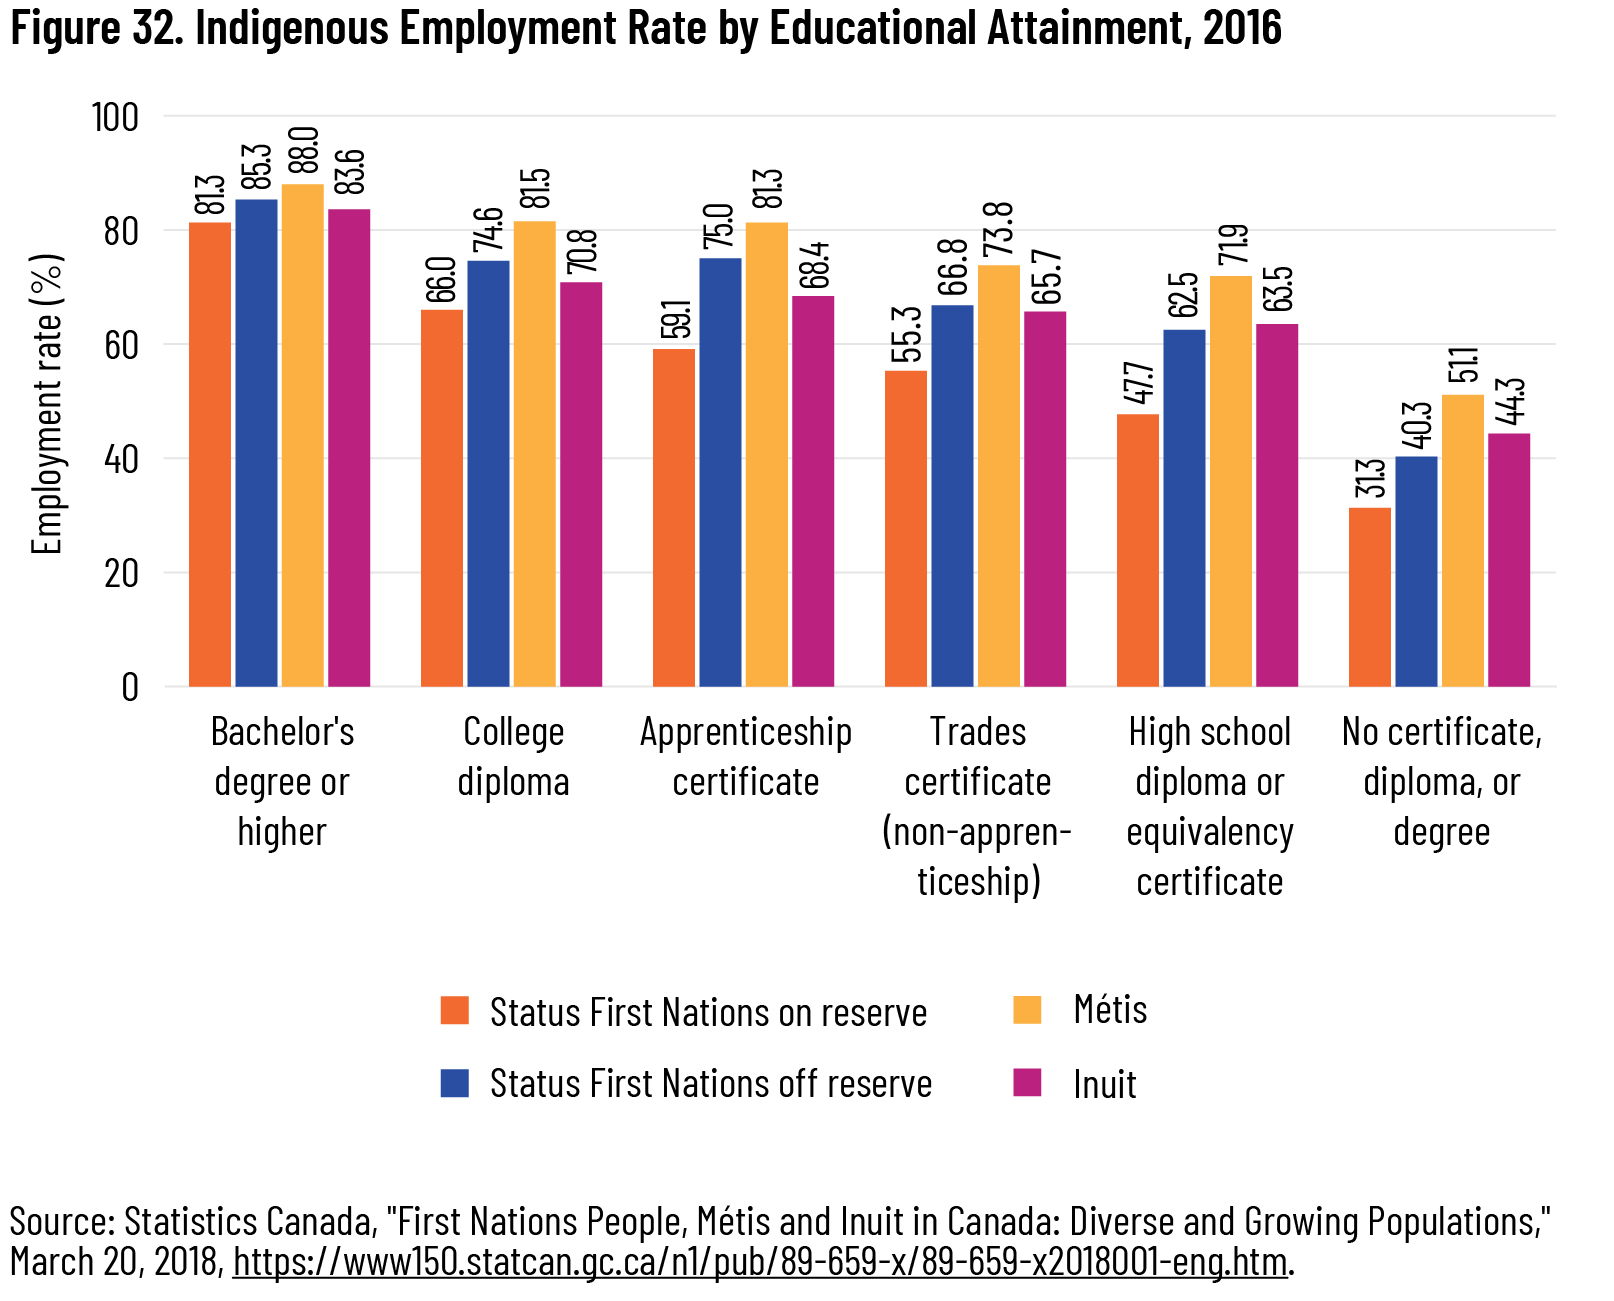 Figure 32. Indigenous Employment Rate by Educational Attainment, 2016